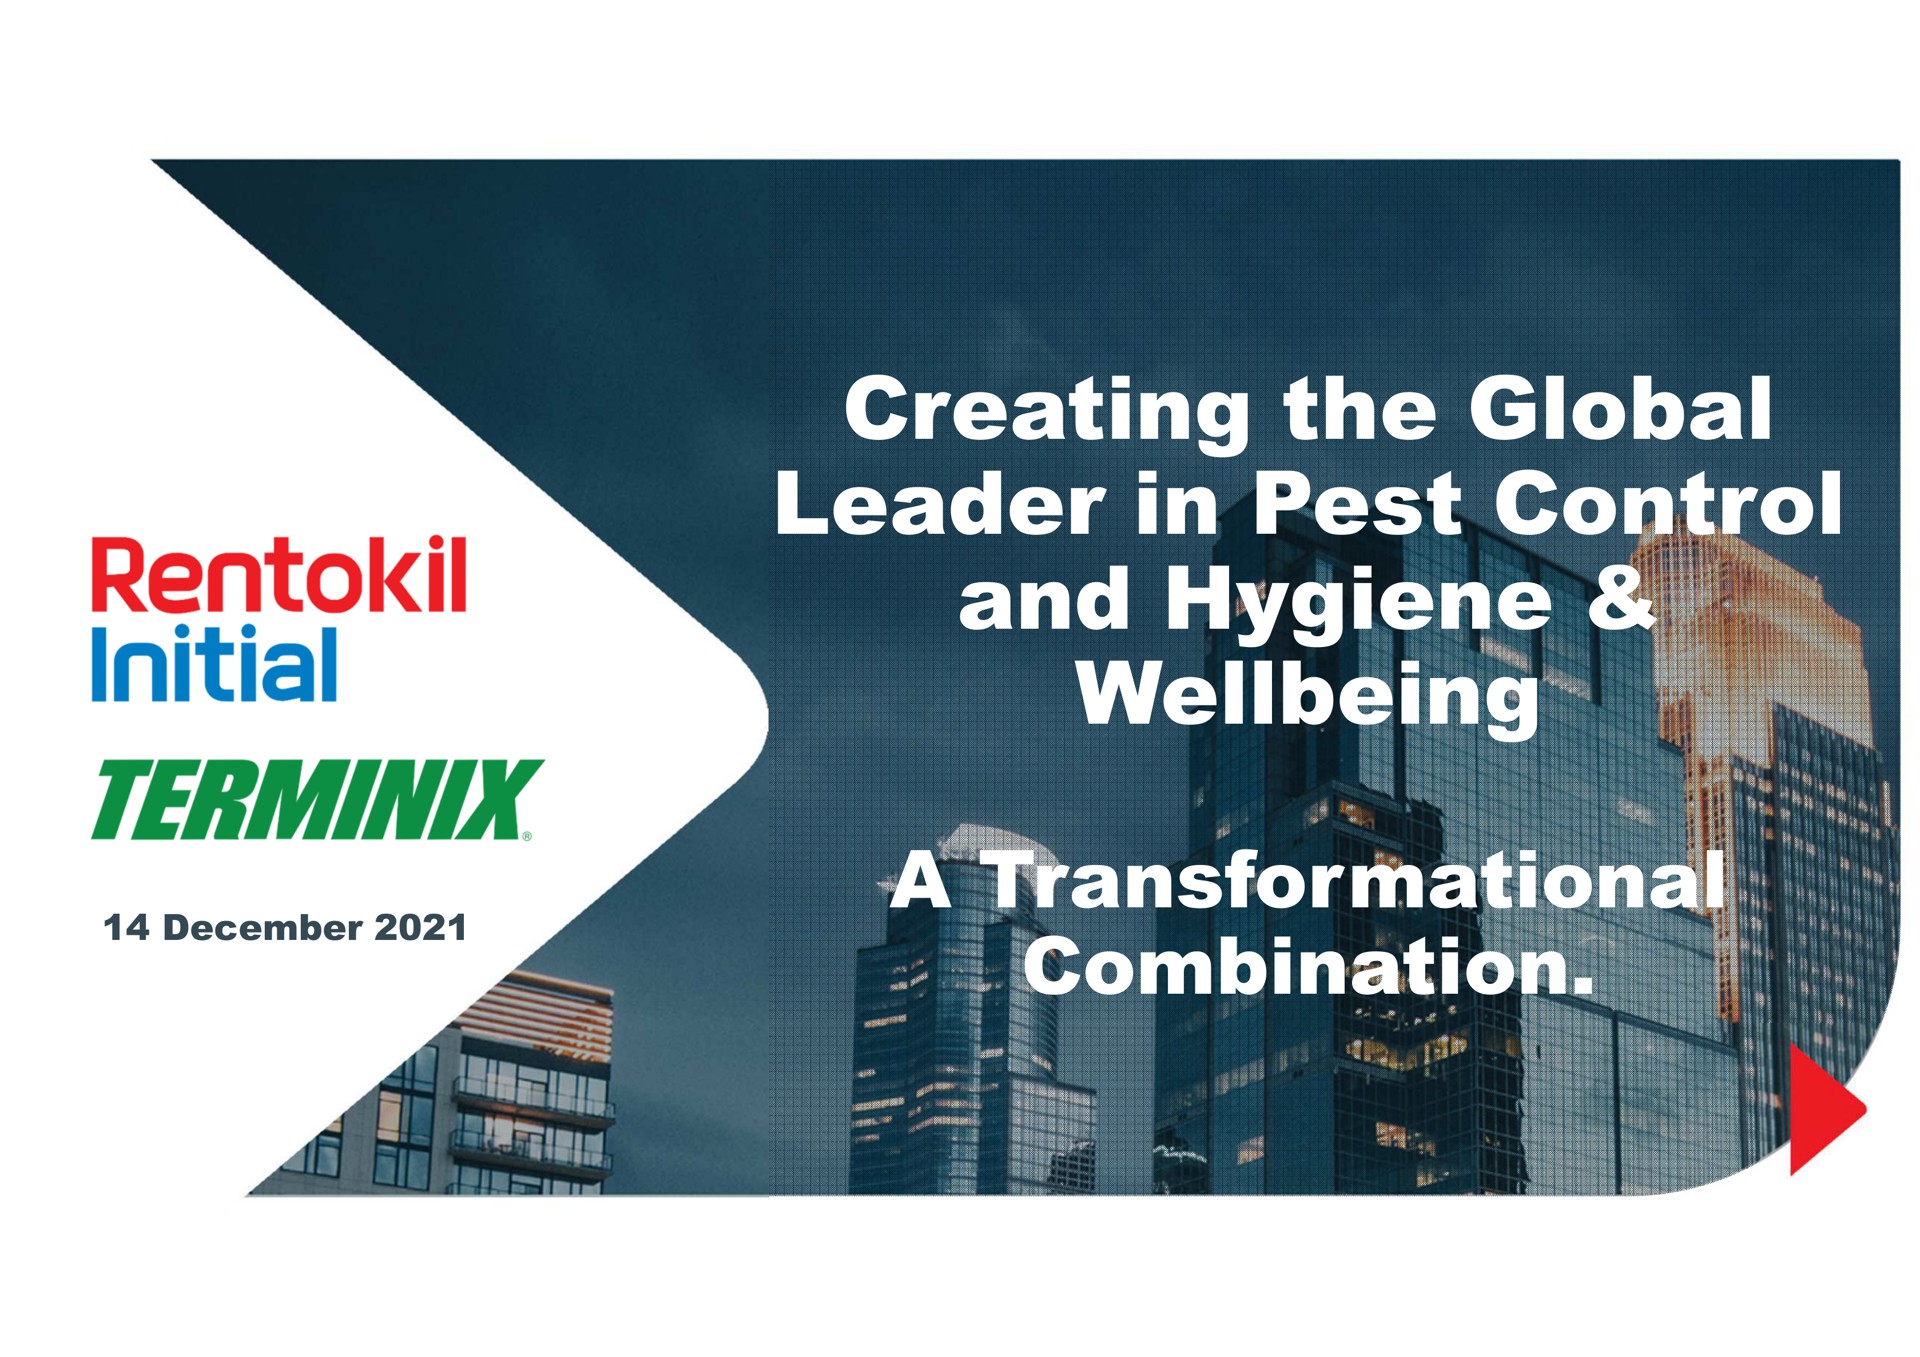 creating the global leader in pest control and hygiene a combination initial | Rentokil Initial